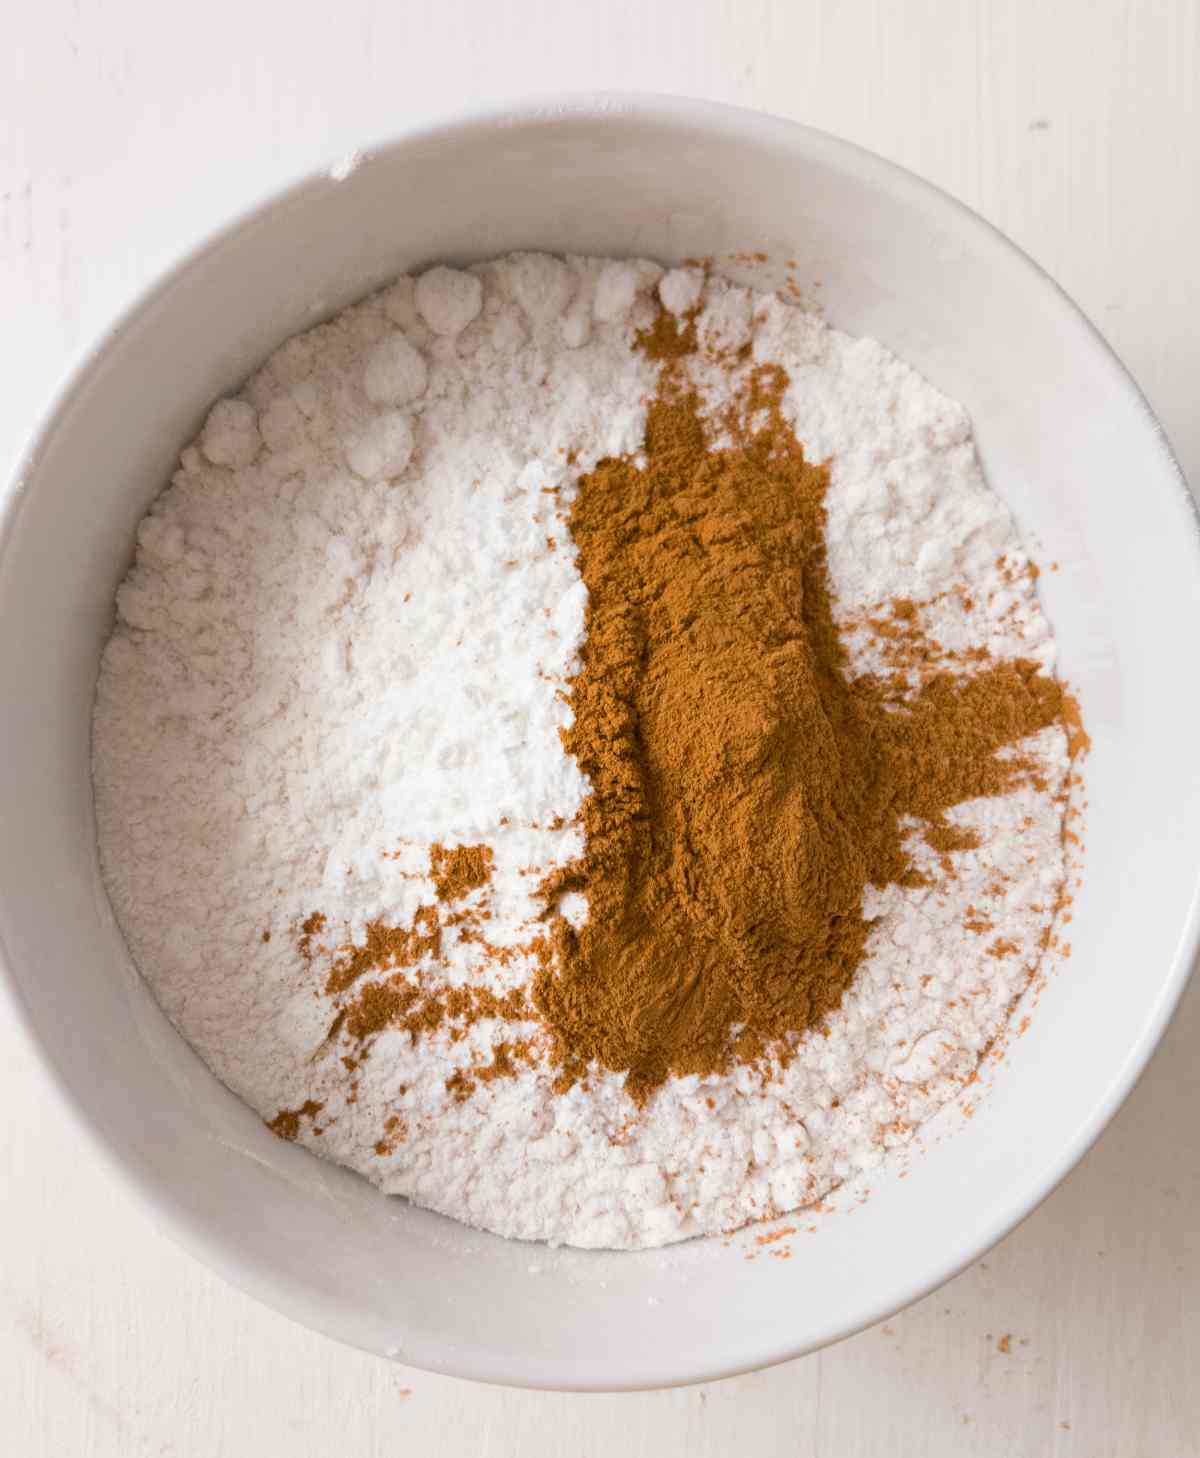 Dry ingredients in a bowl before mixing.